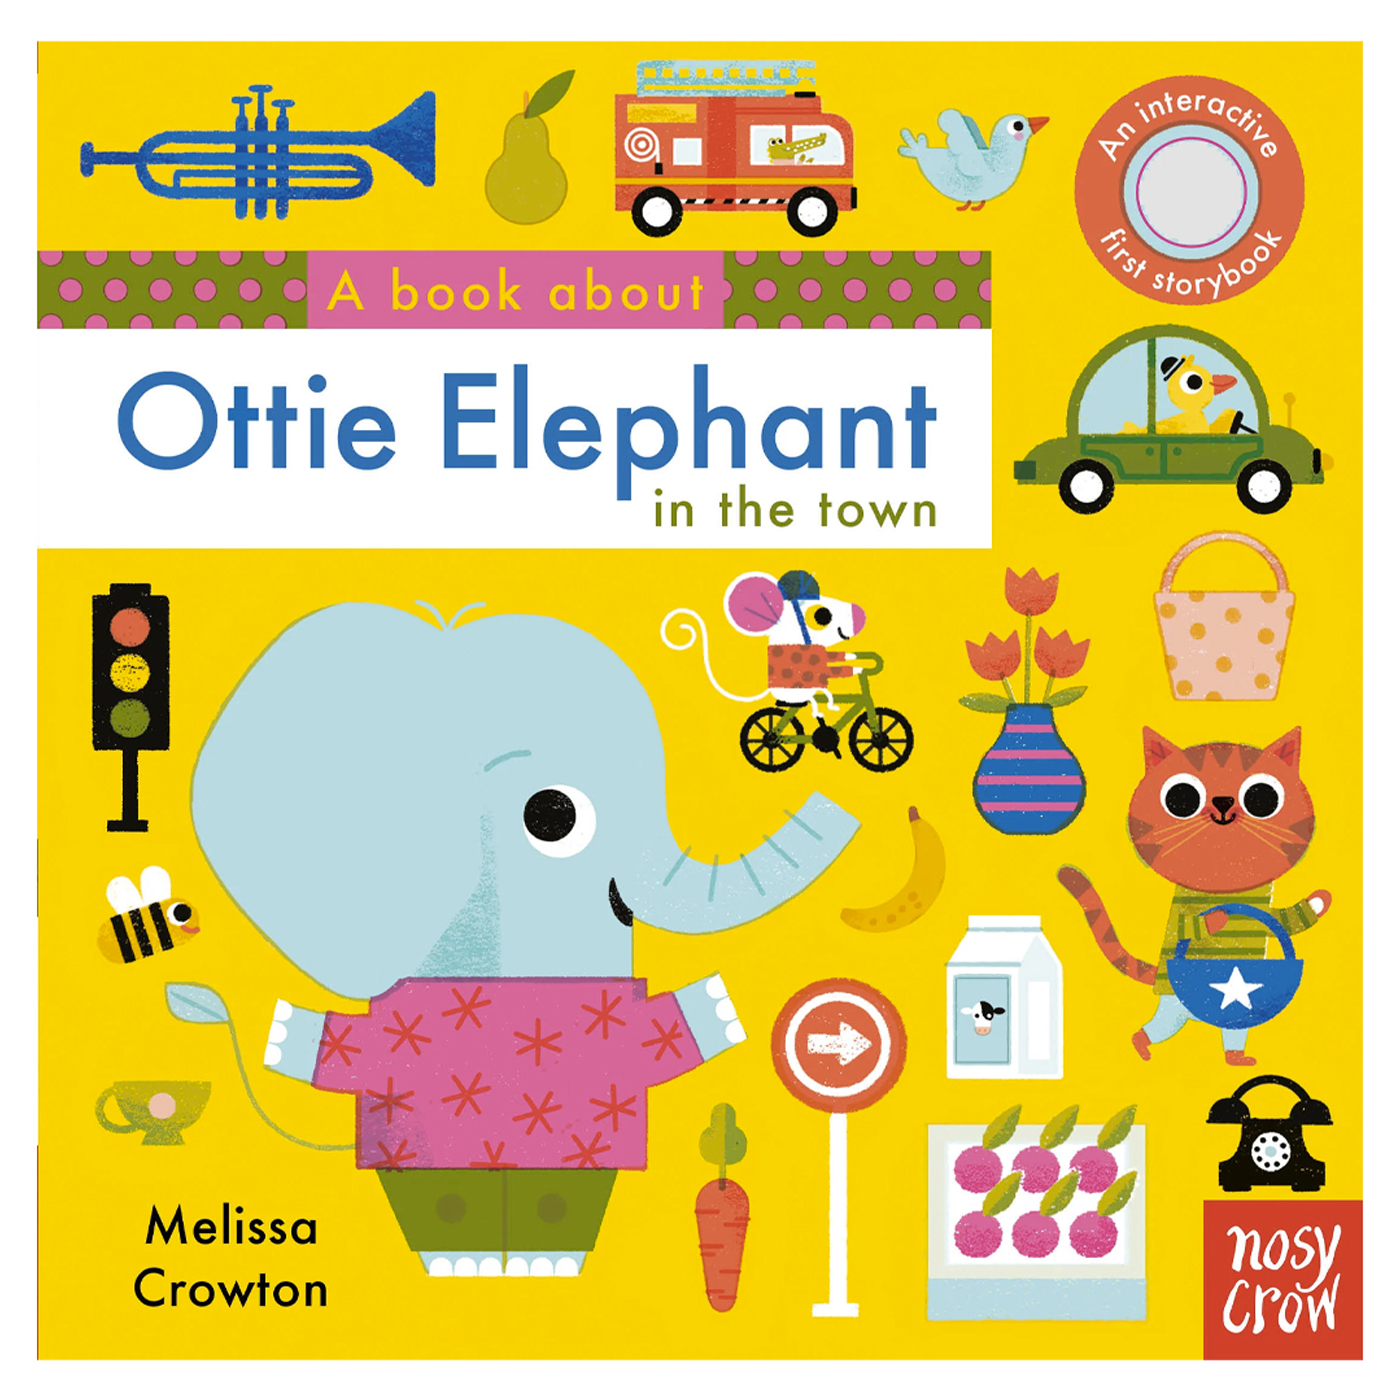  A book about Ottie Elephant in the town